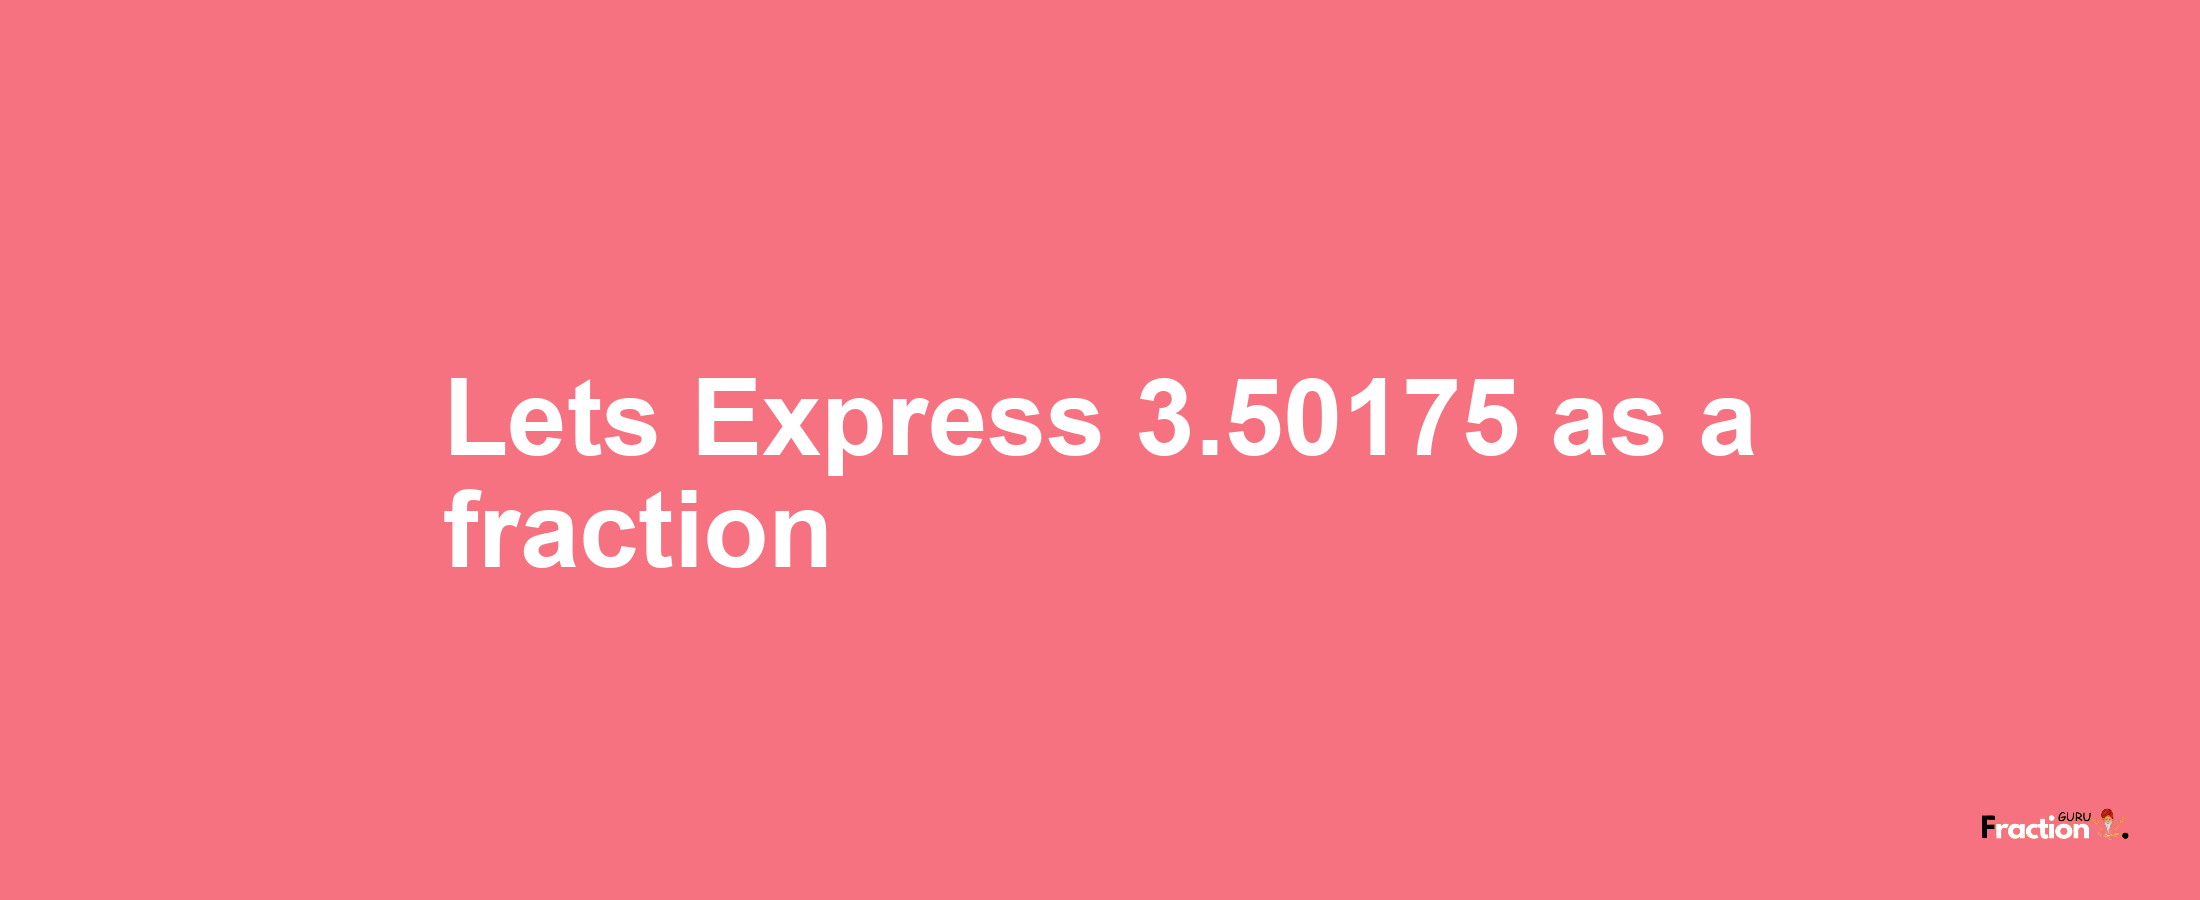 Lets Express 3.50175 as afraction